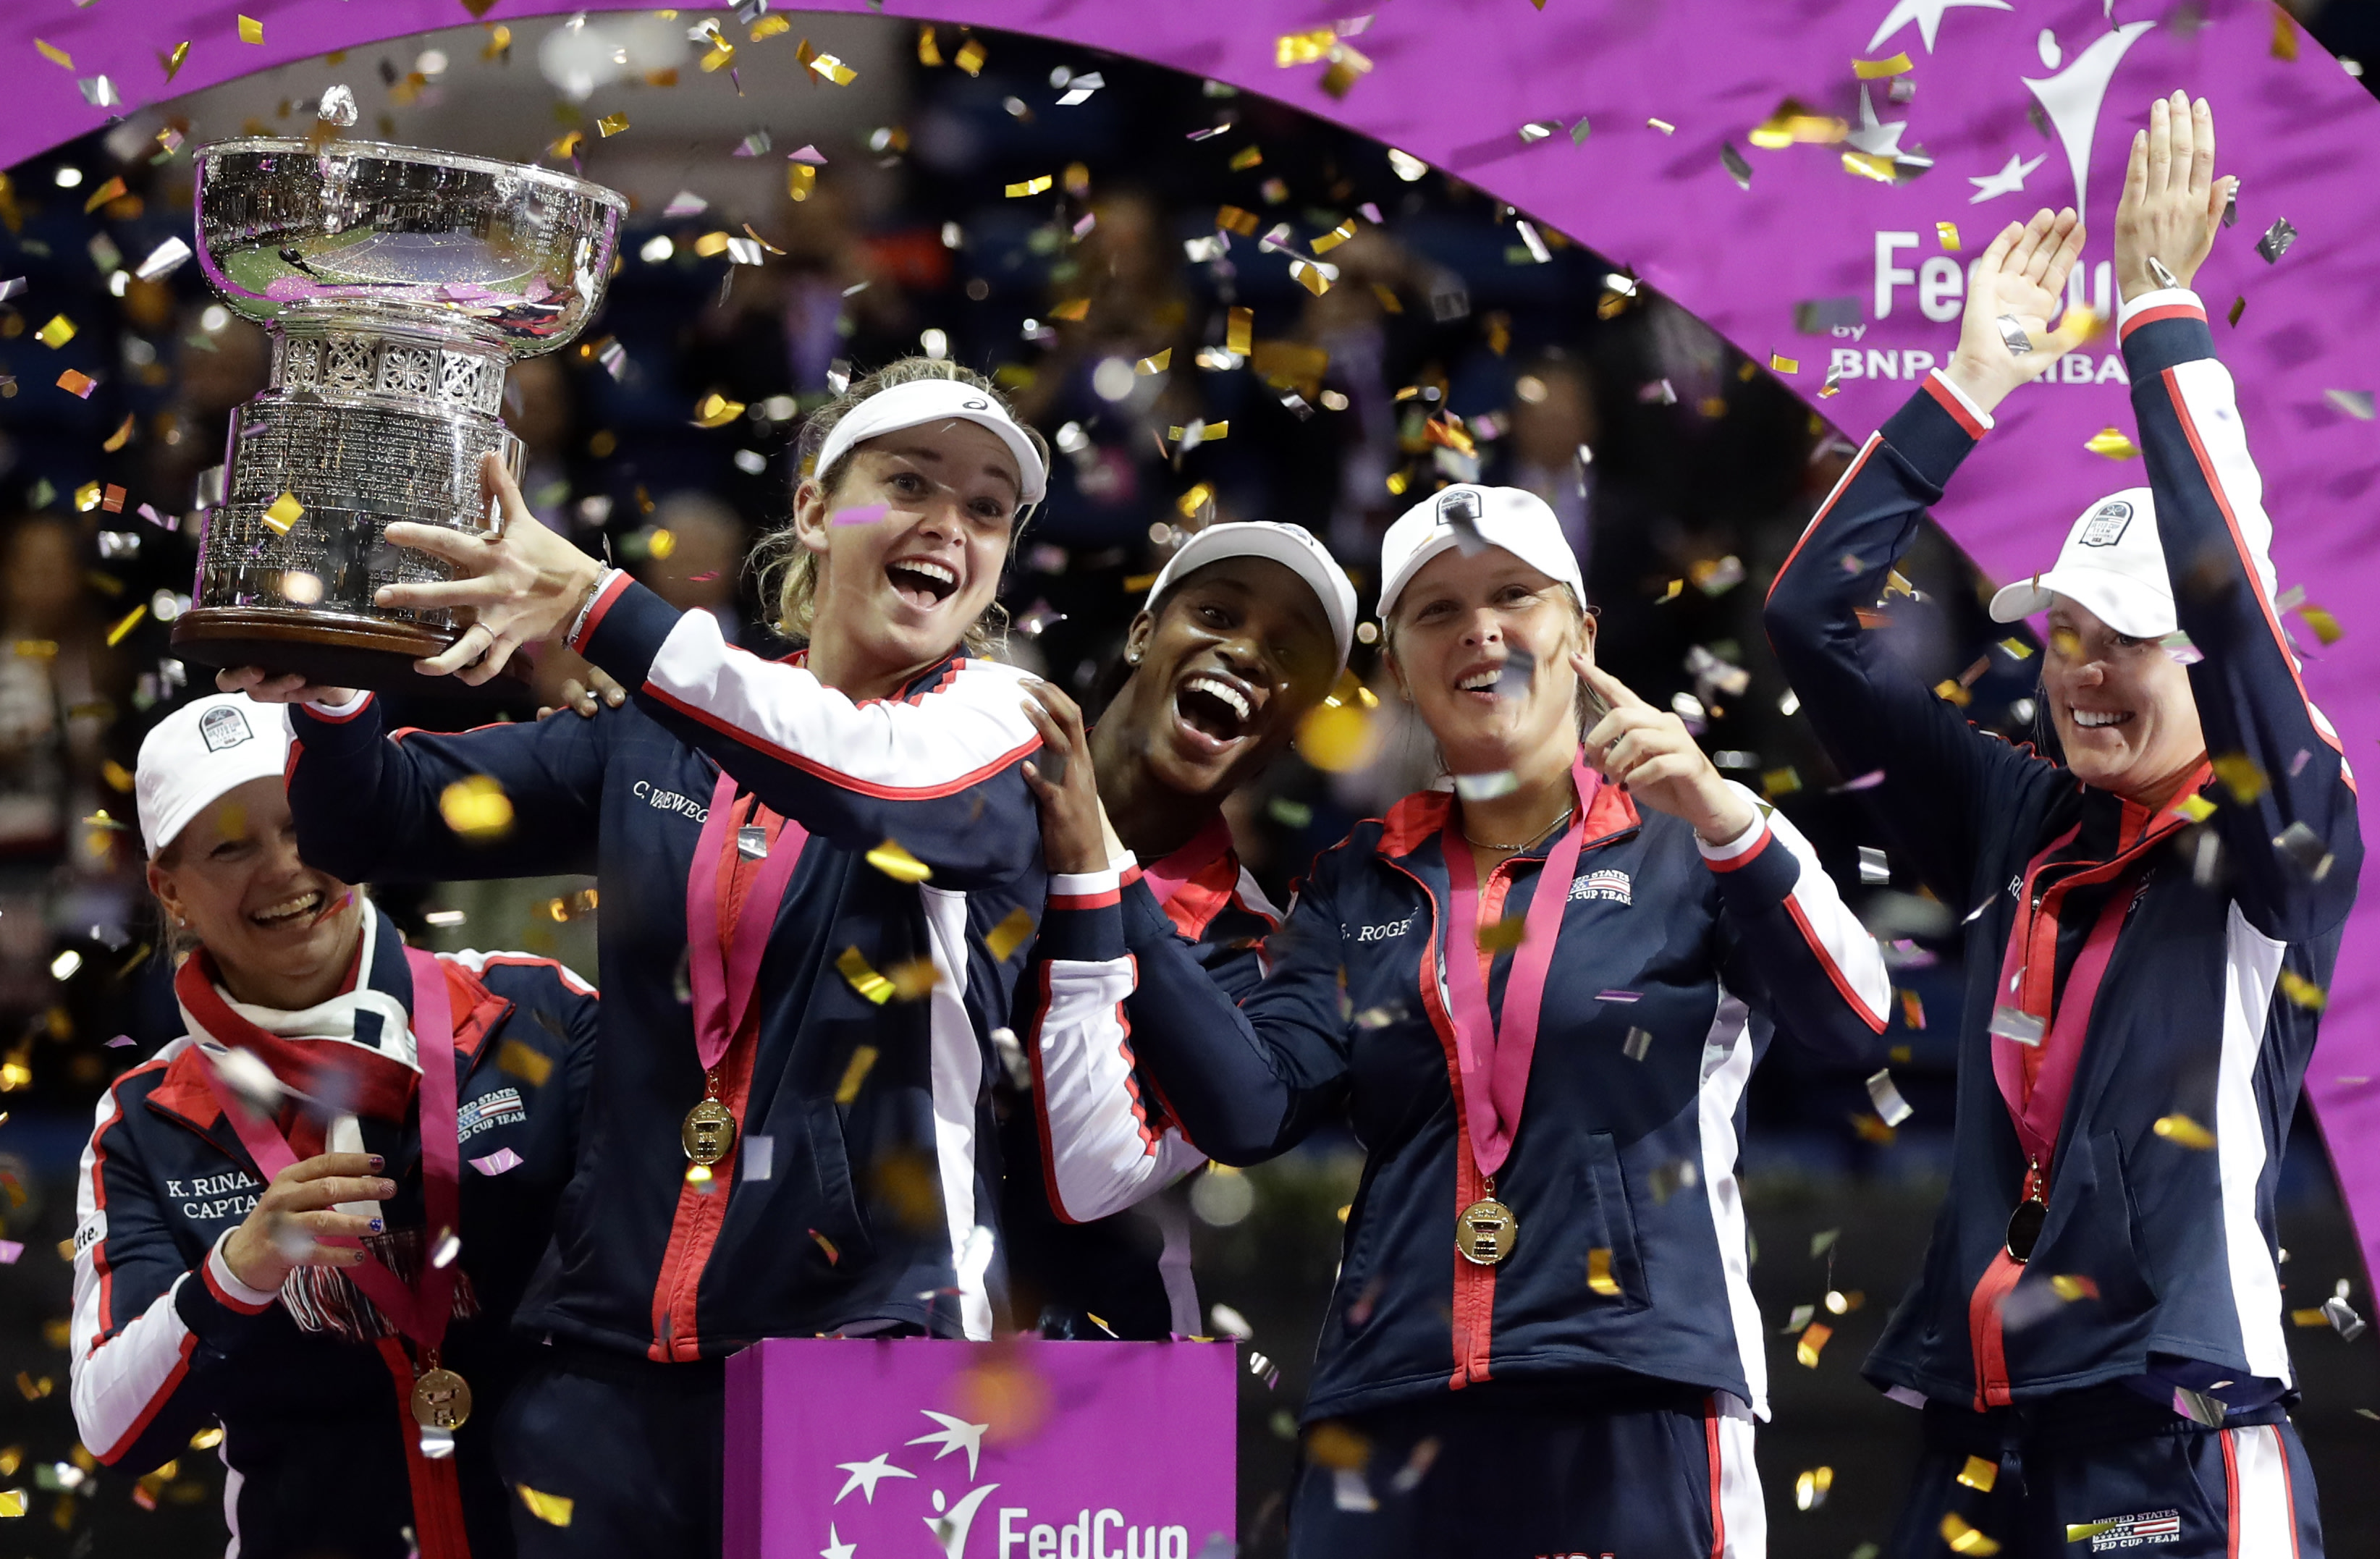 Fed Cup Weekend: 10 things to know | Tennis.com